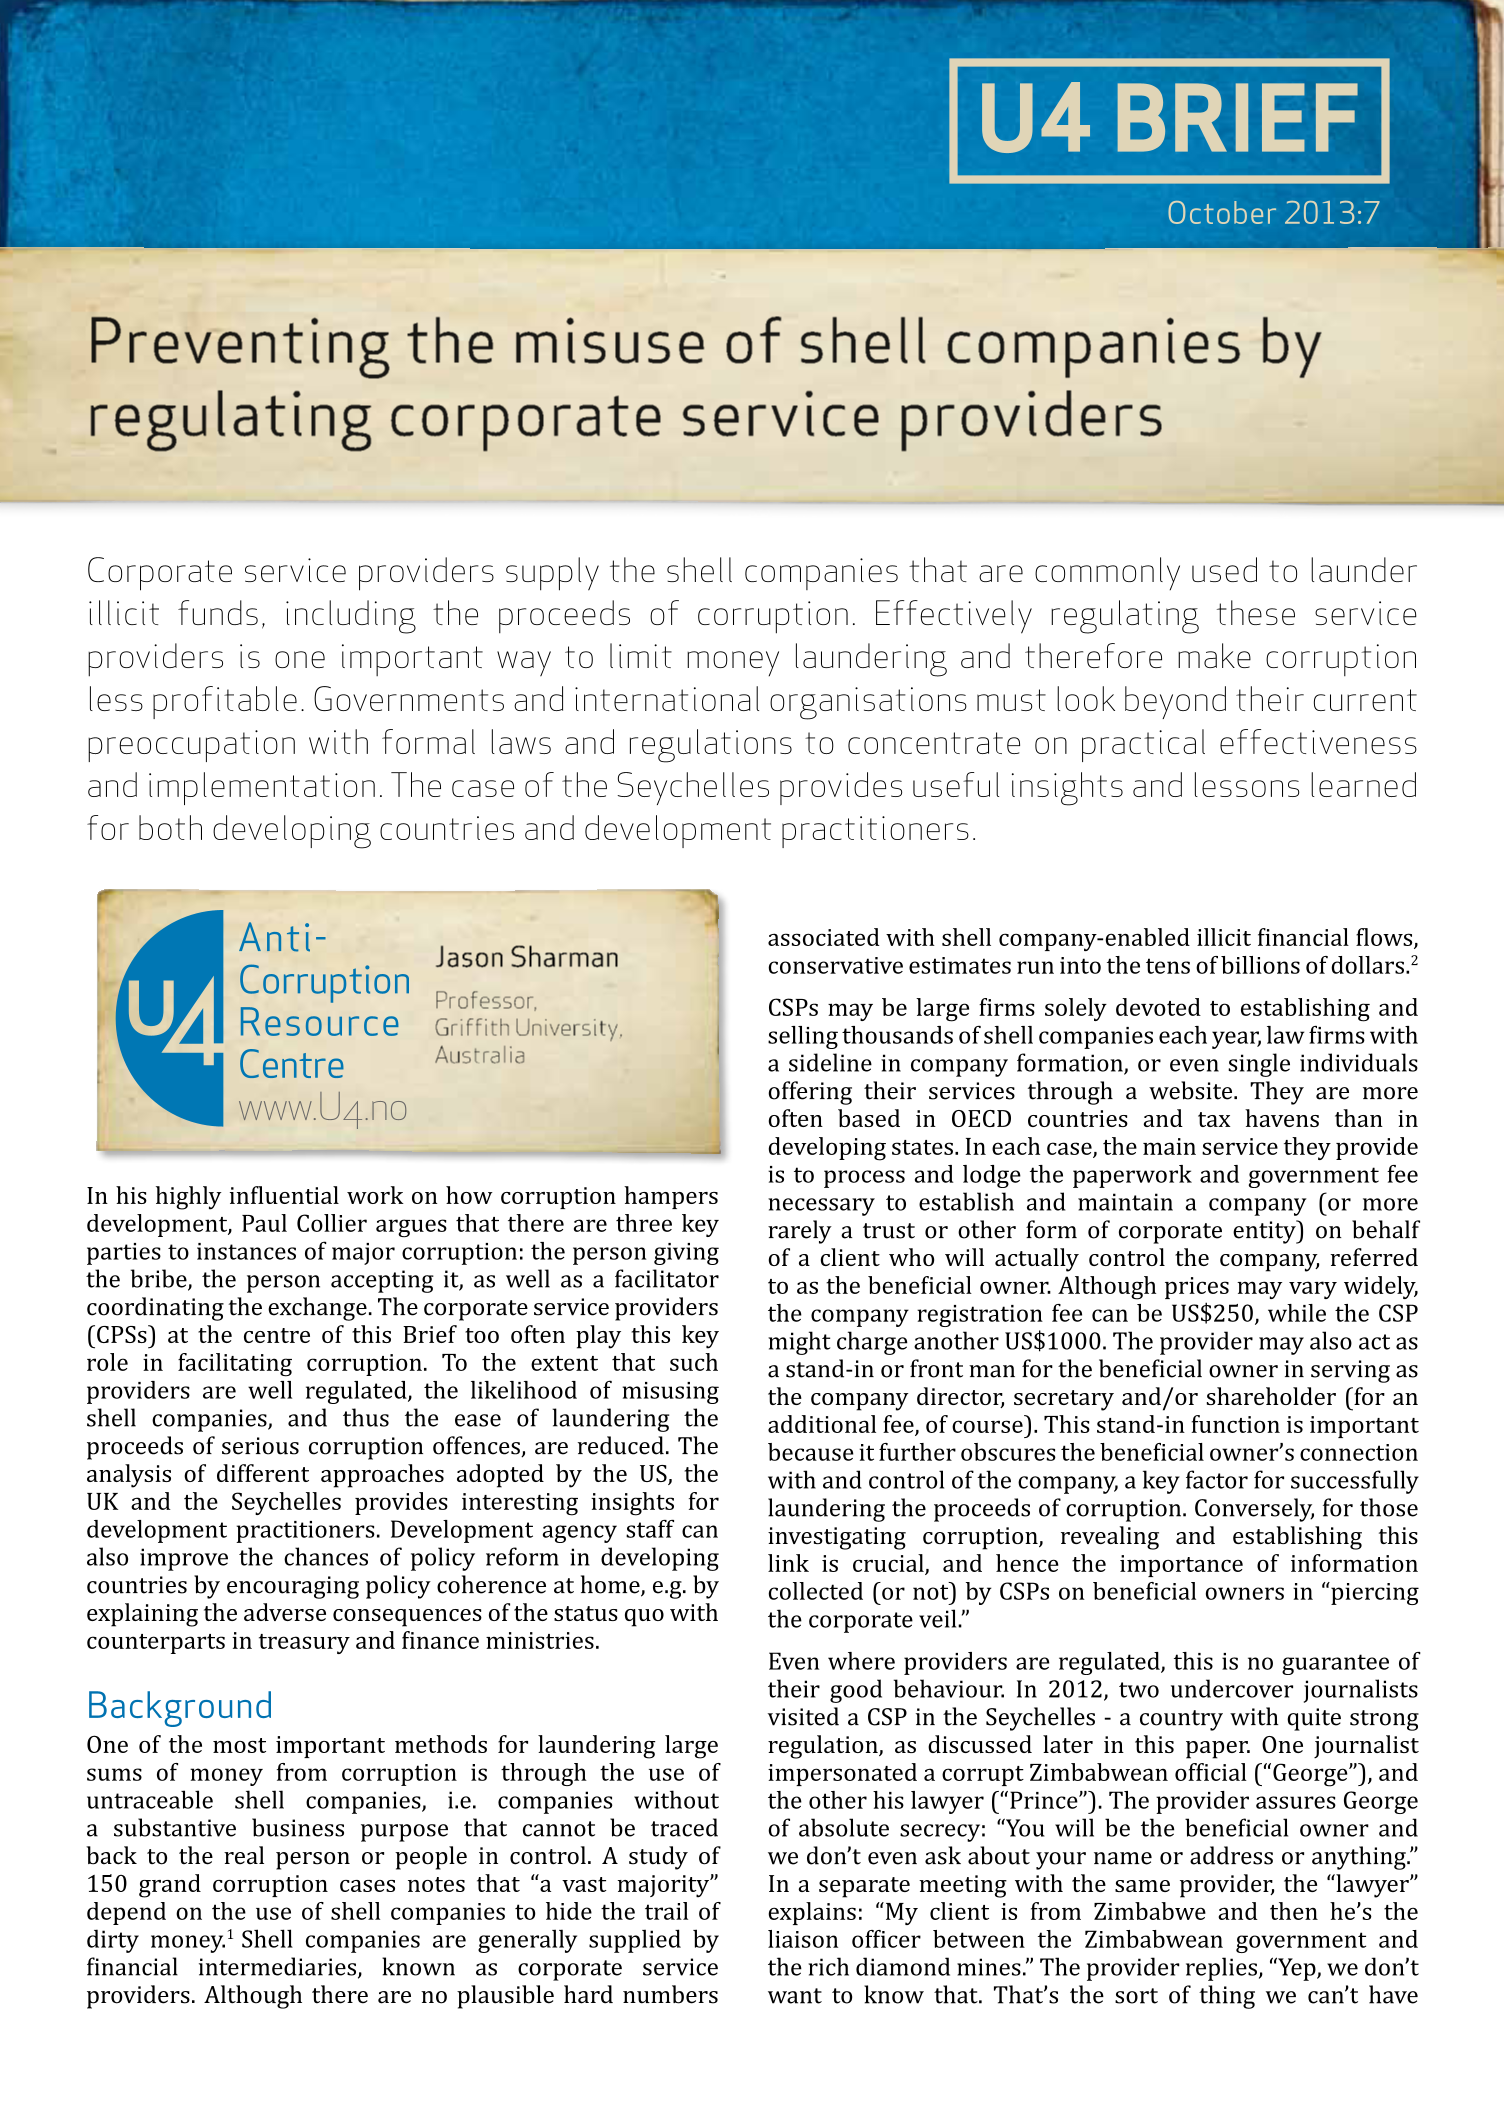 Preventing the misuse of shell companies by regulating corporate service providers